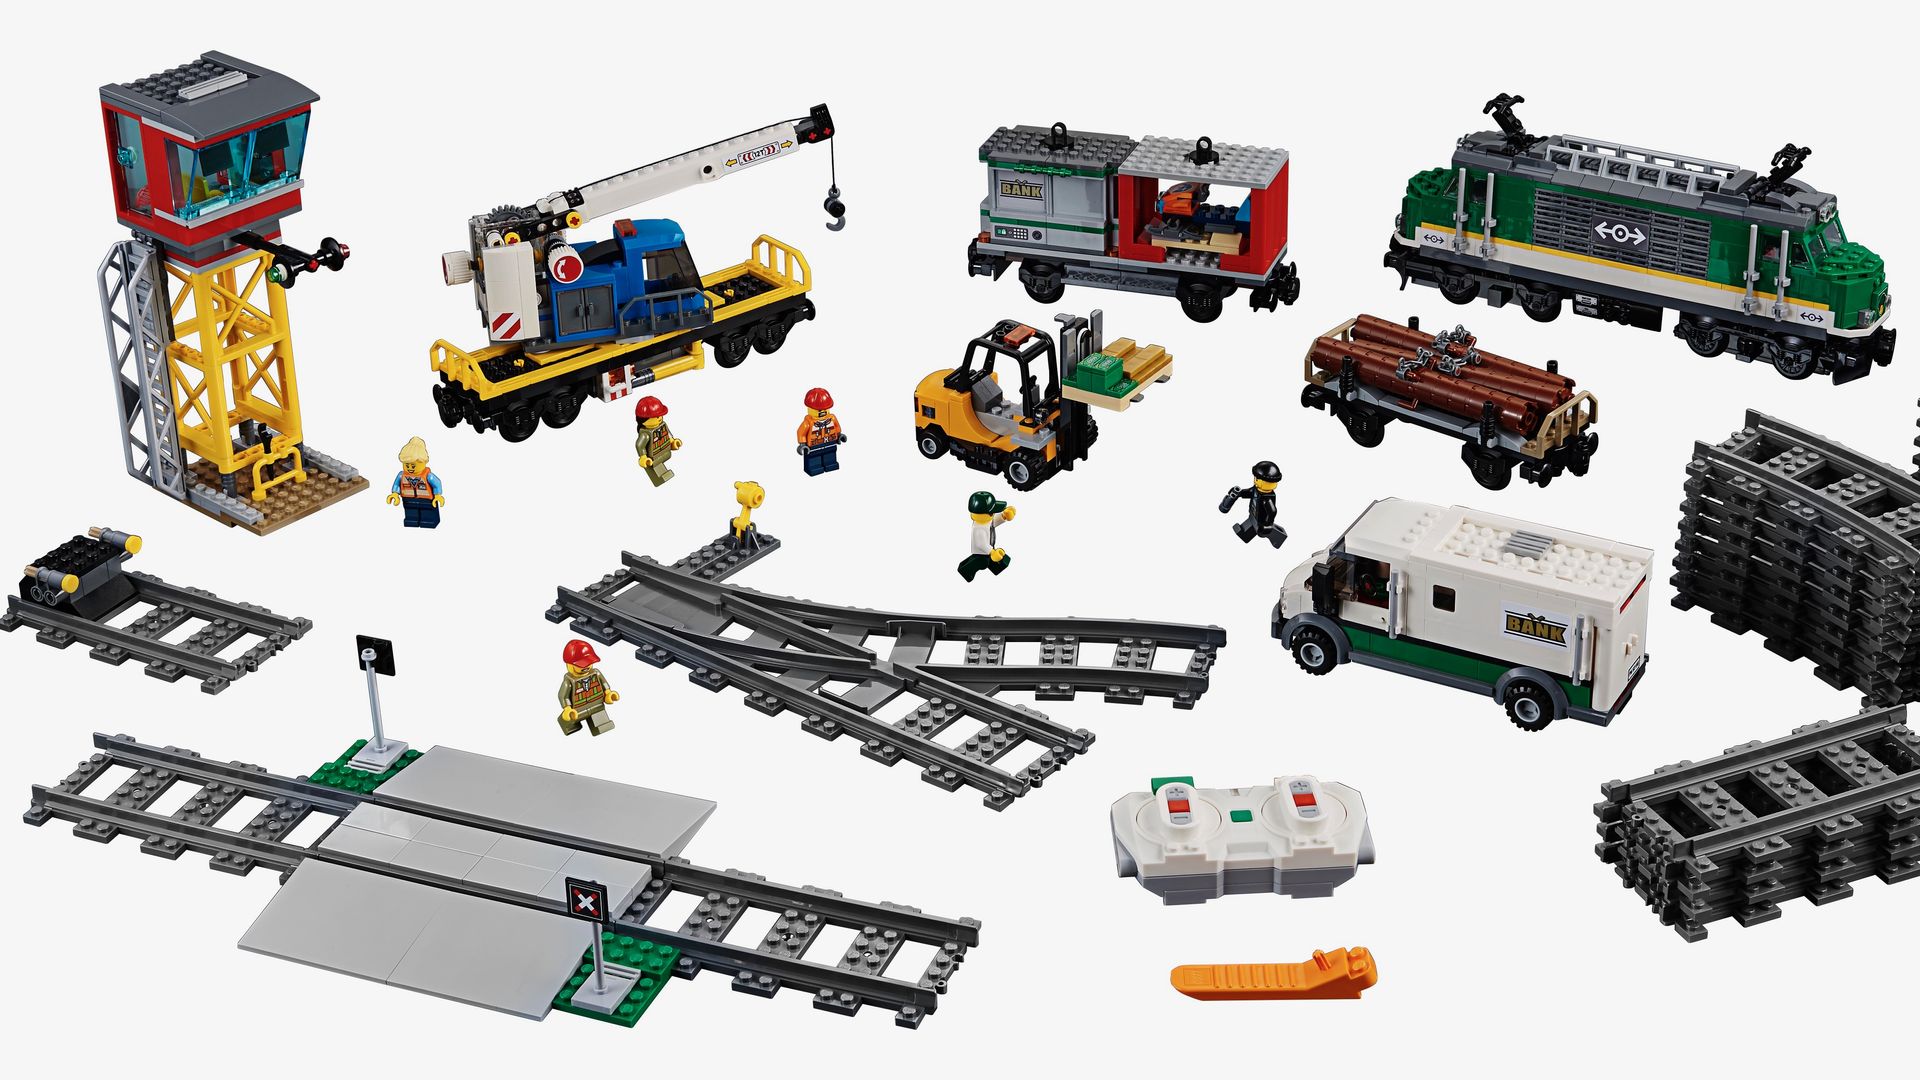 Here's a closer look at the new LEGO sets you can buy later this year